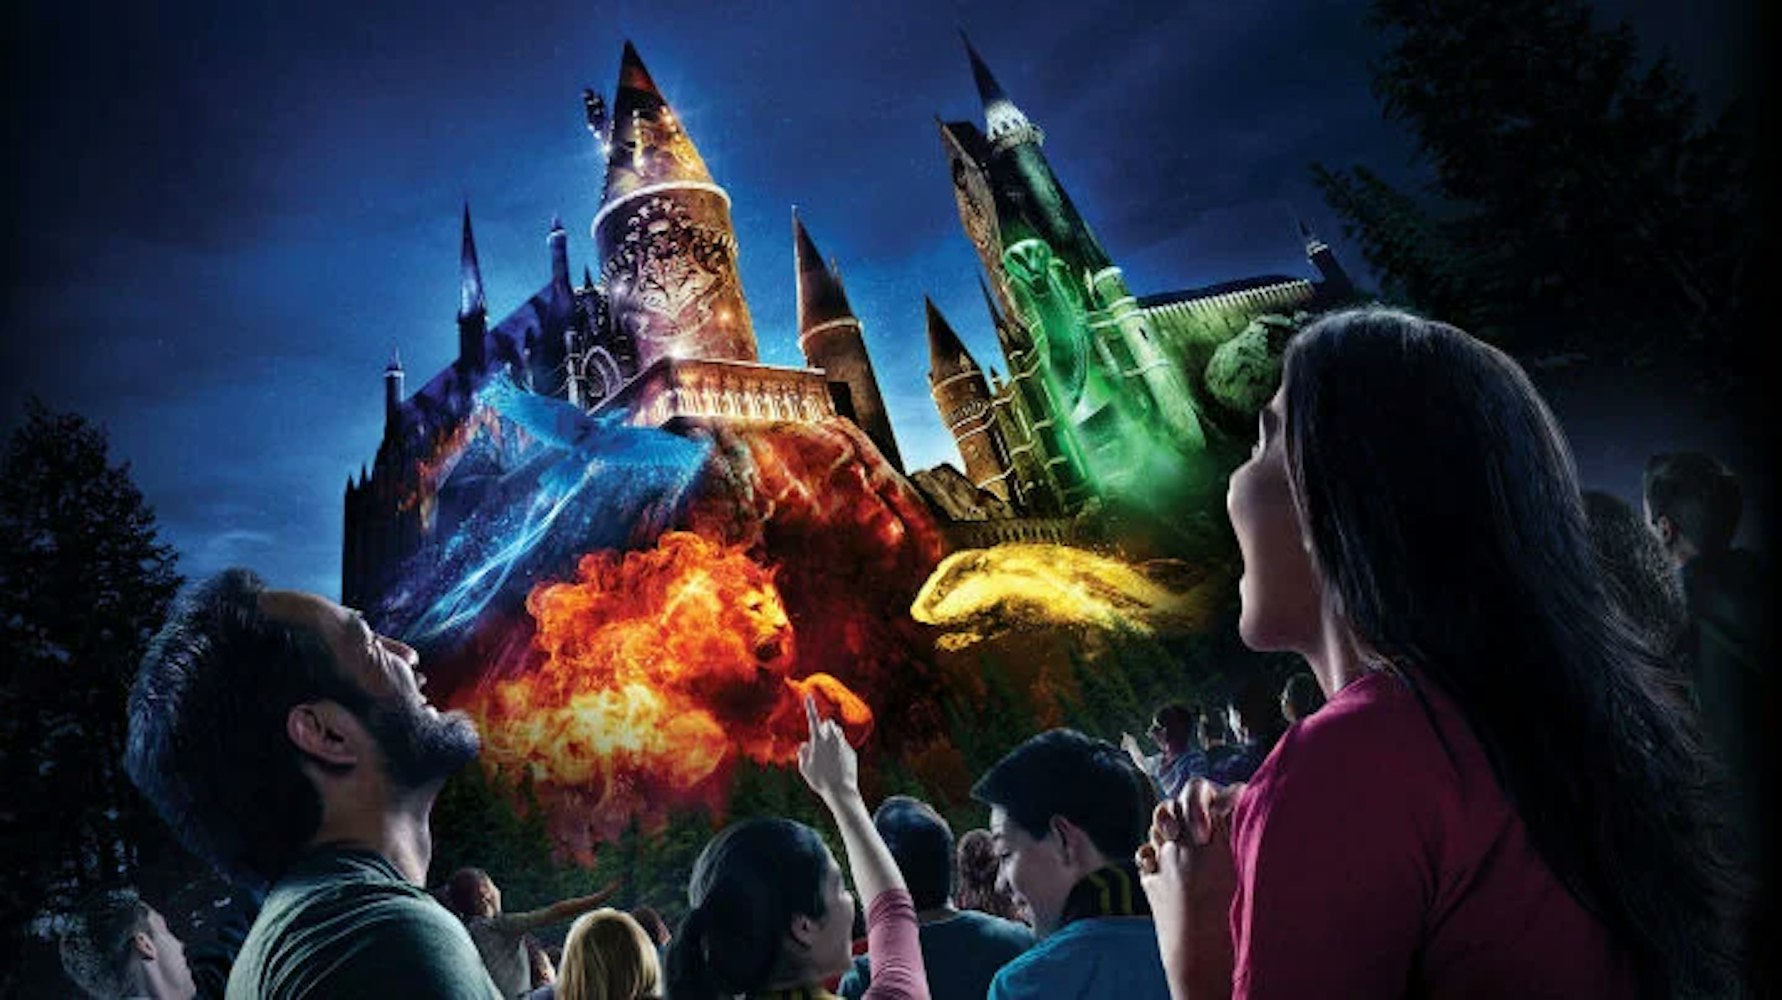 Cover Image for Closures and Refurbishments for Universal 2023/2024